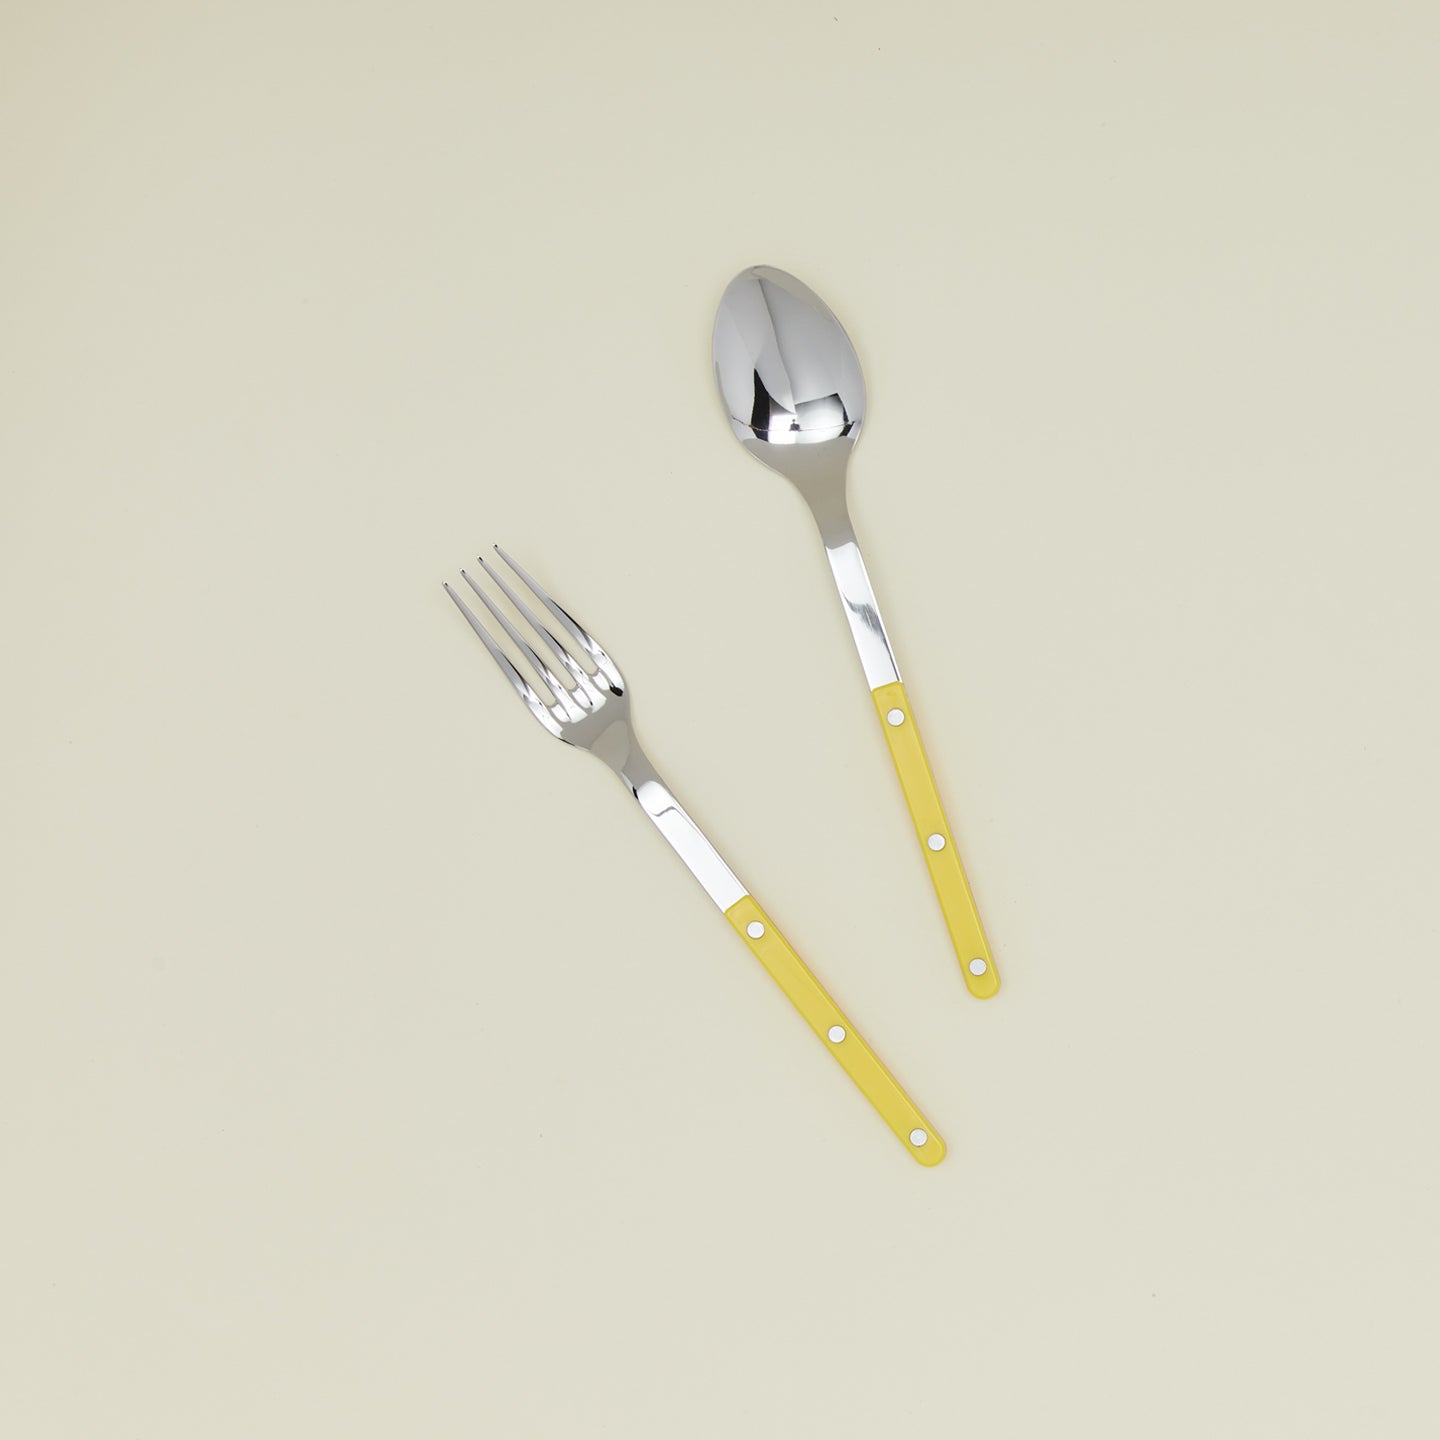 Bistrot Serving Set in yellow.